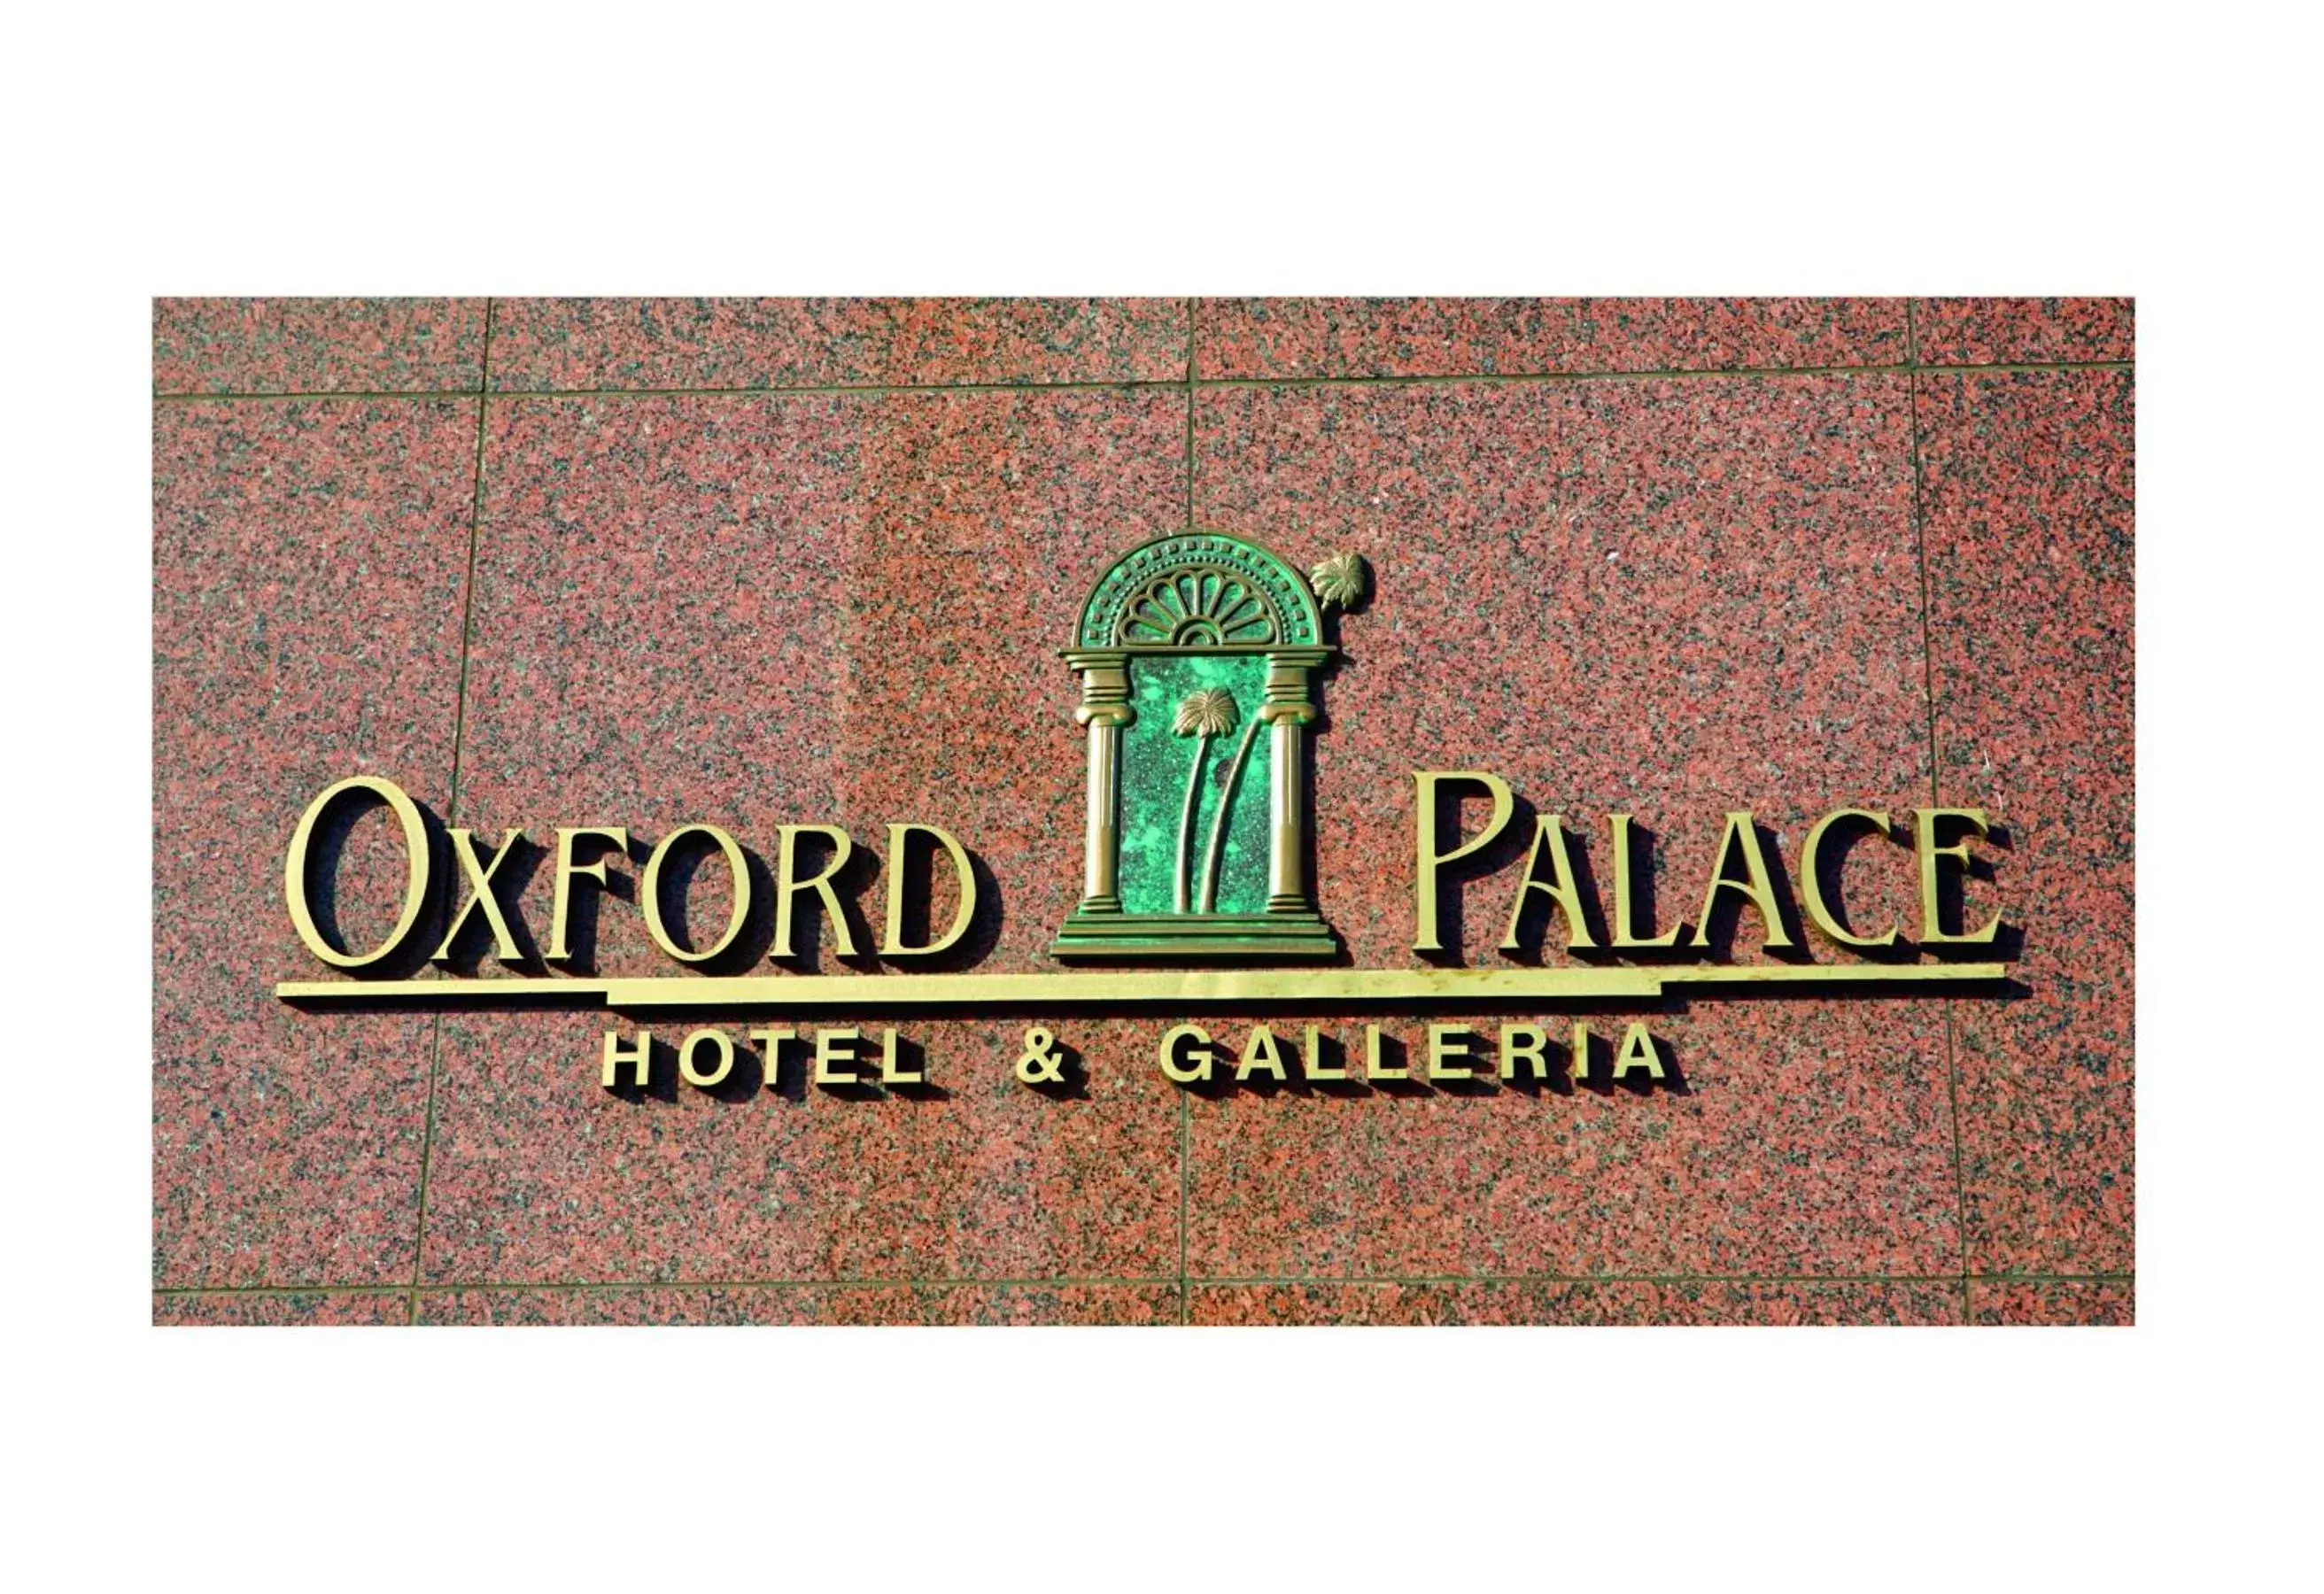 Decorative detail, Logo/Certificate/Sign/Award in Oxford Palace Hotel